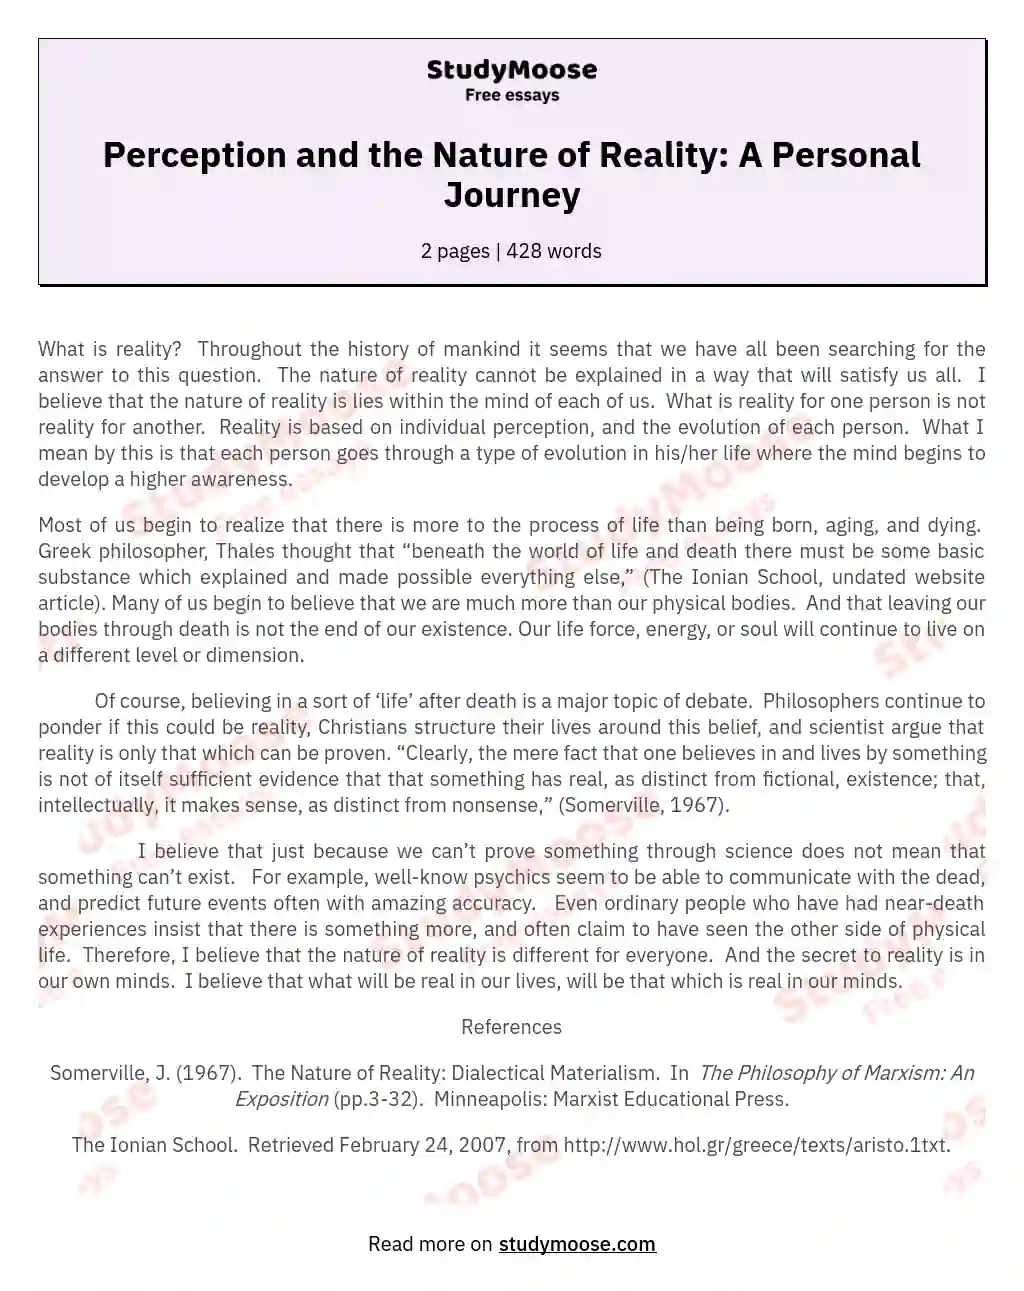 Perception and the Nature of Reality: A Personal Journey essay